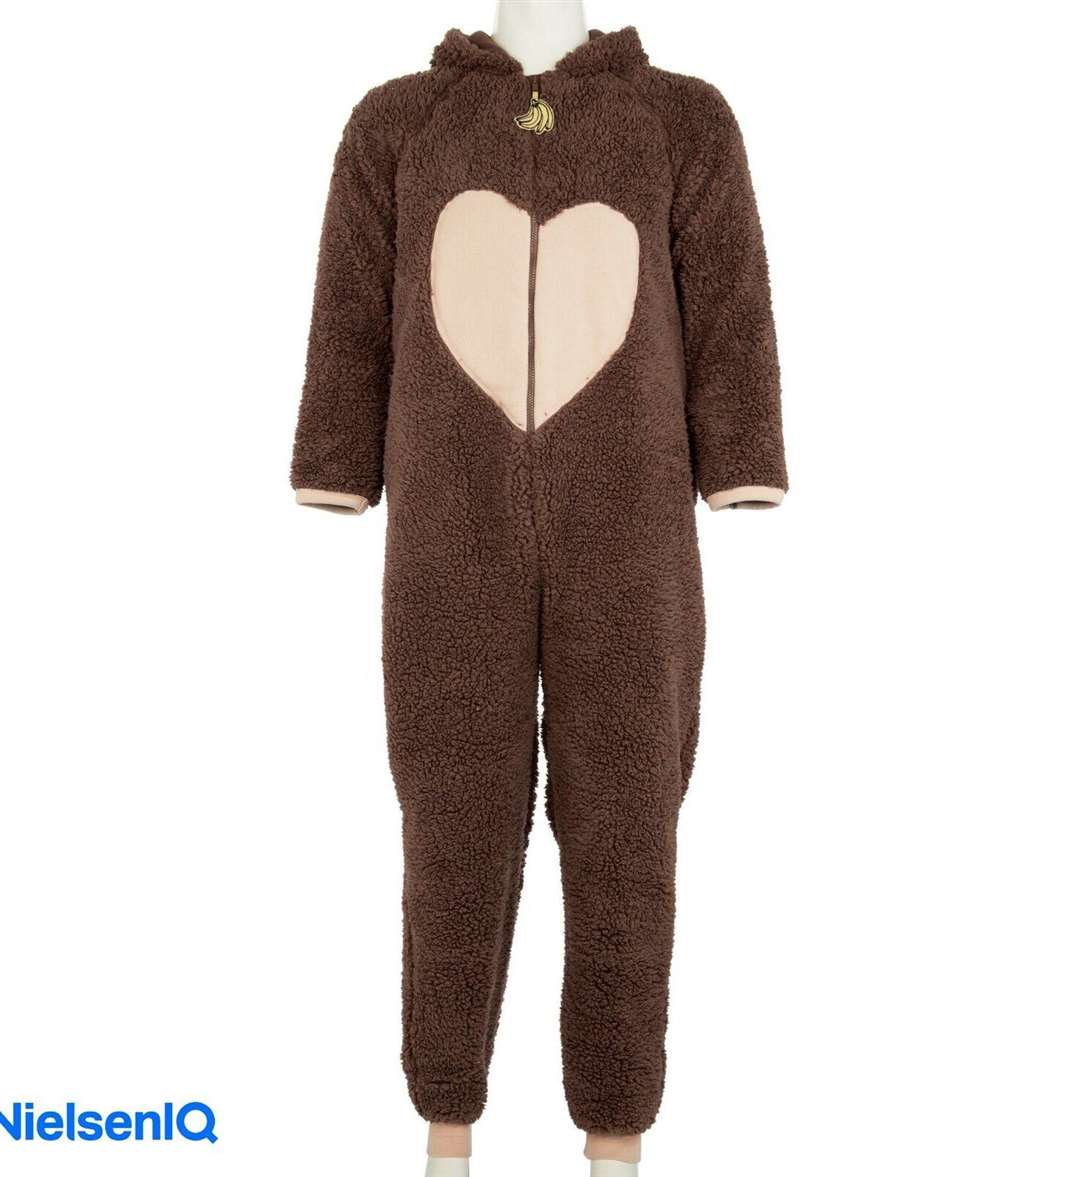 A onesie owned by Ed Sheeran, being auctioned by EACH. Picture: EACH